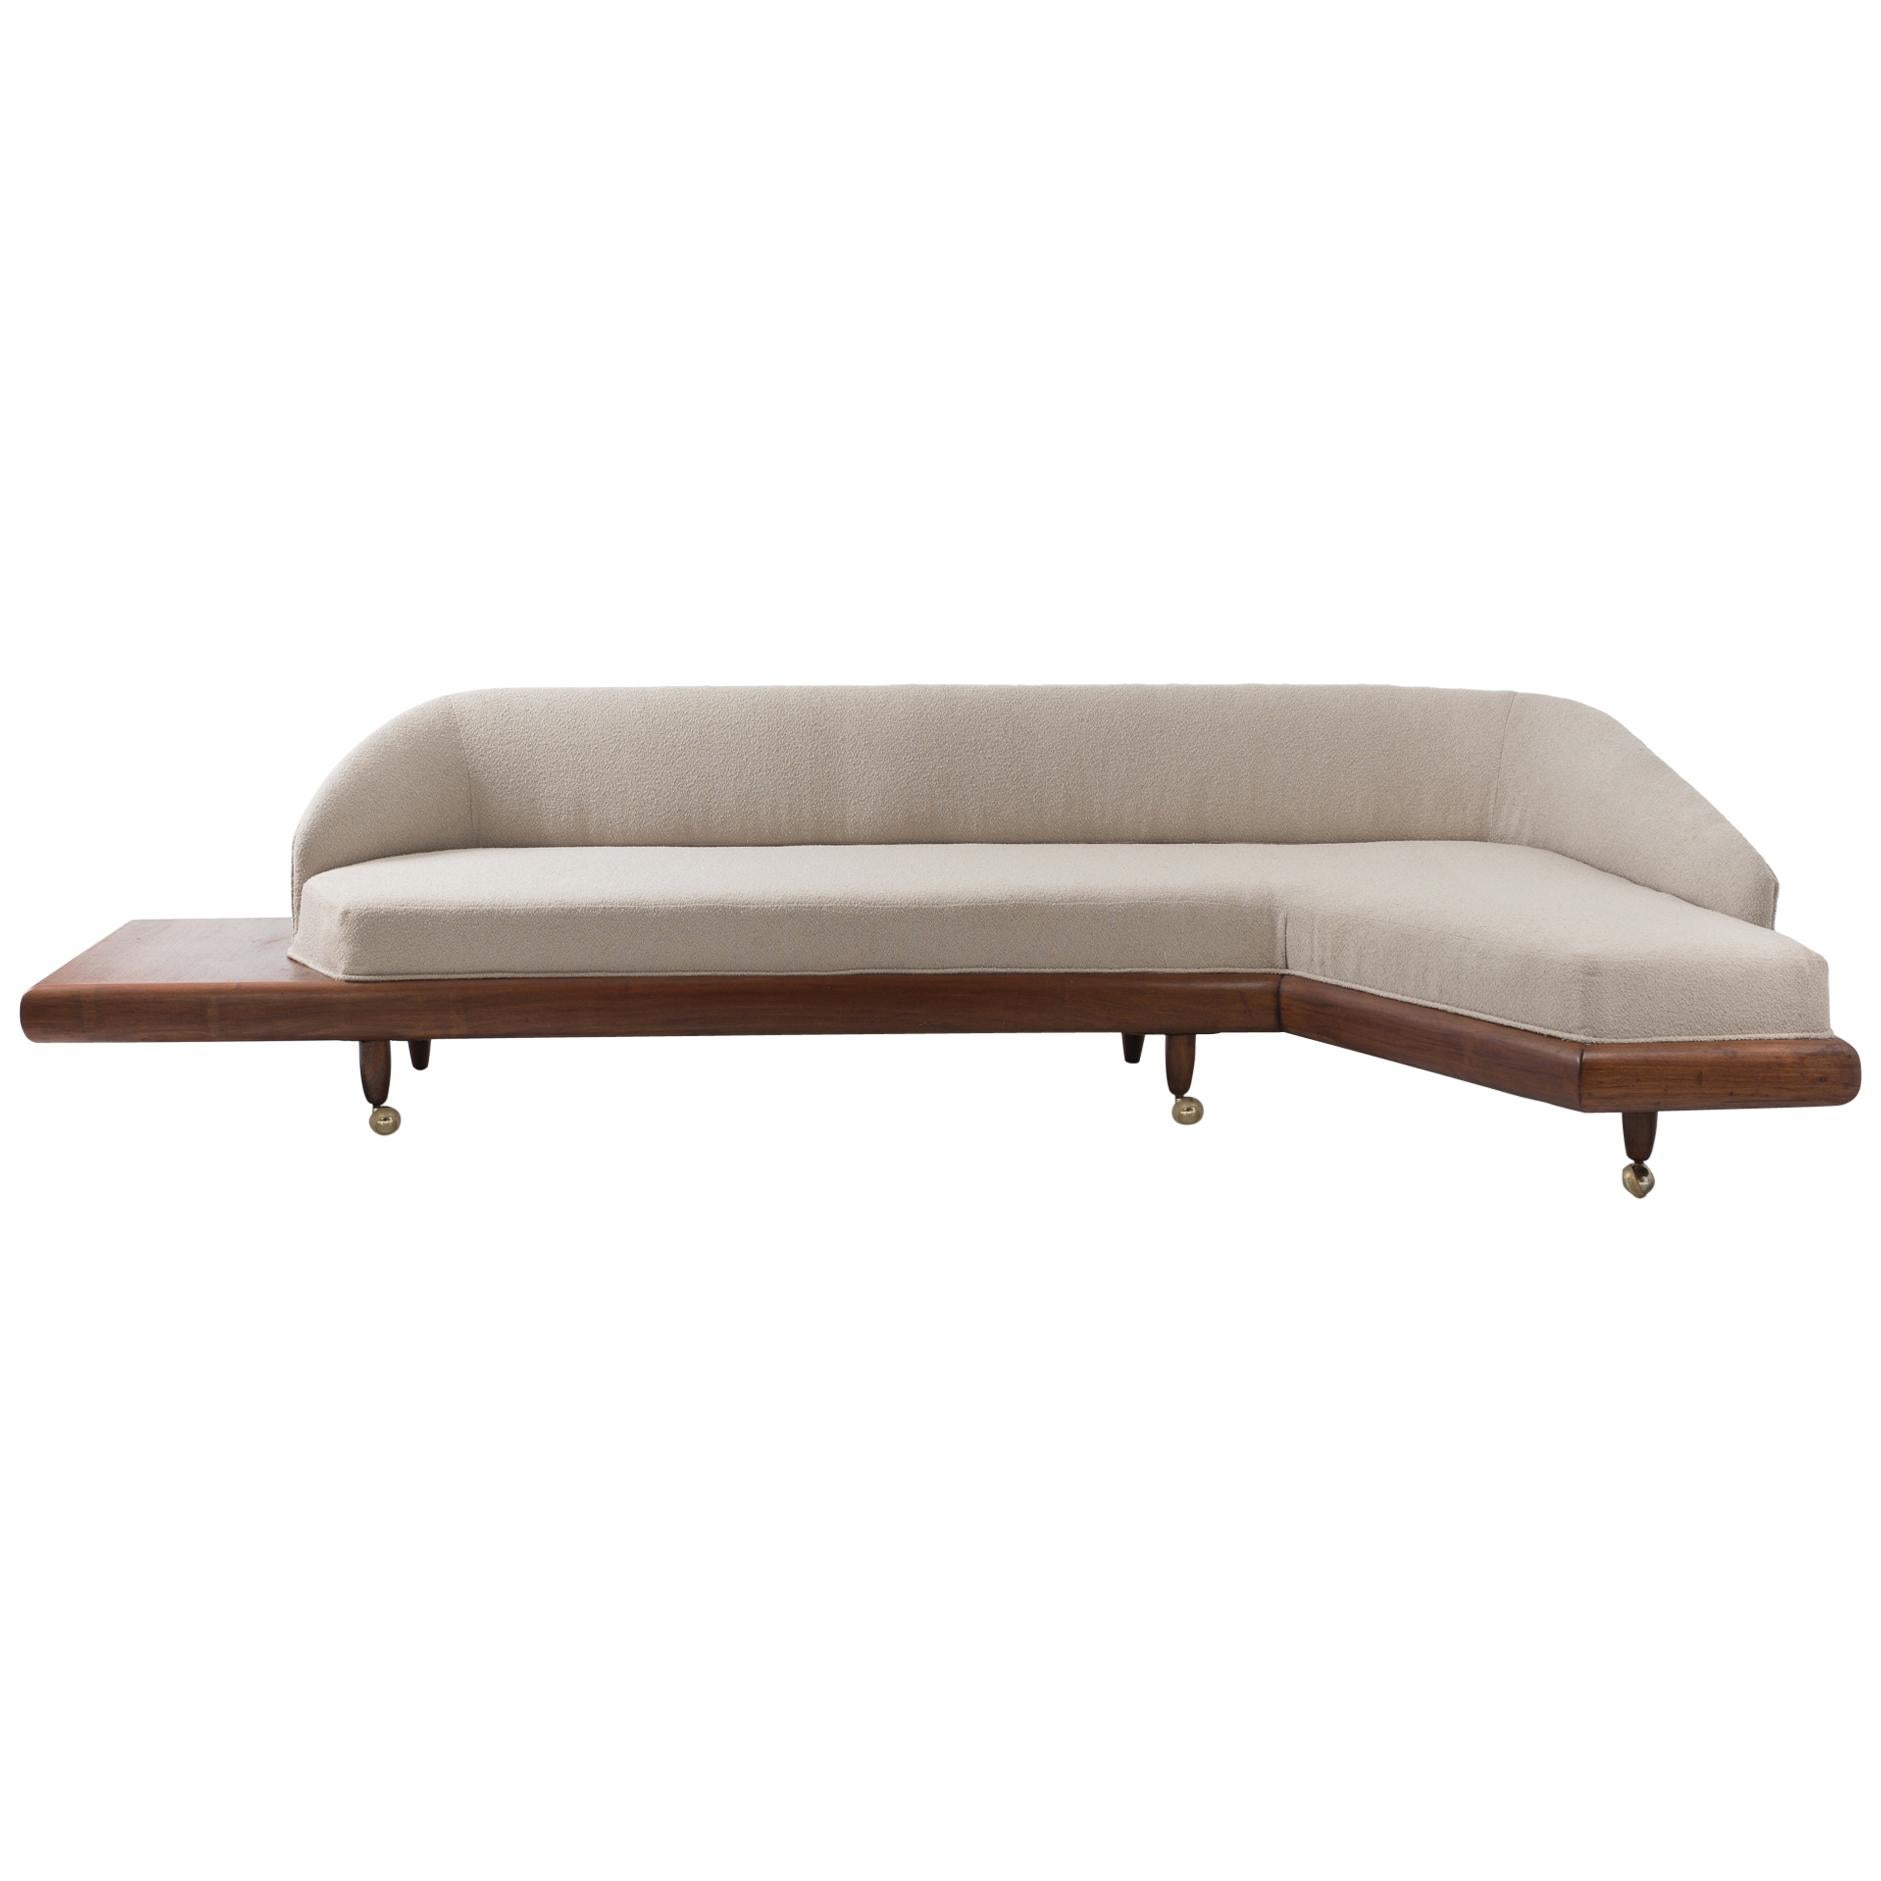 Super Sexy Iconic Grand Boomerang Sofa Attributed to Adrian Pearsall